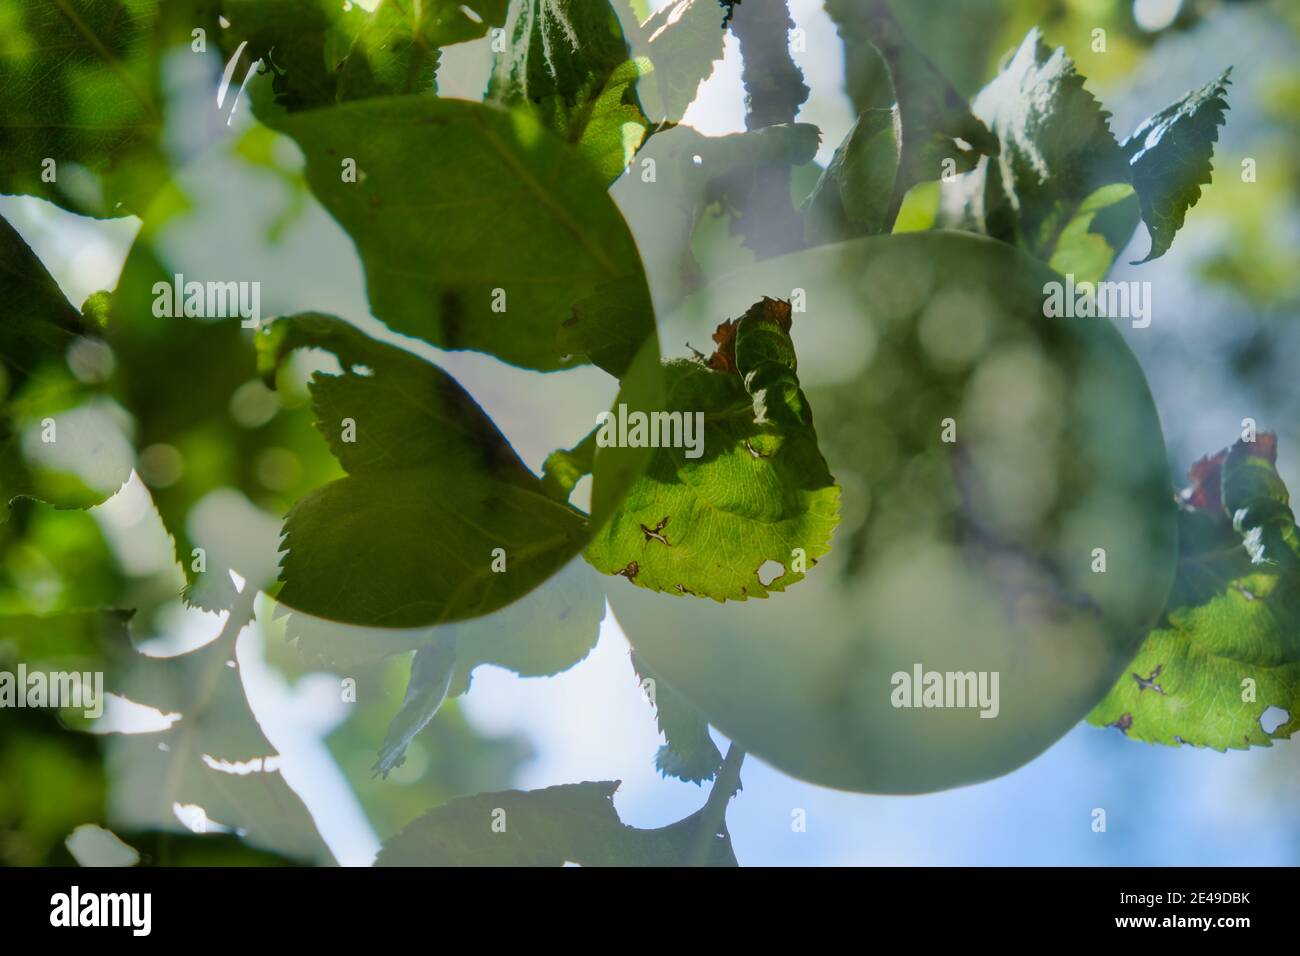 Abstract: Double exposure of green apple hanging from tree in an English garden Stock Photo